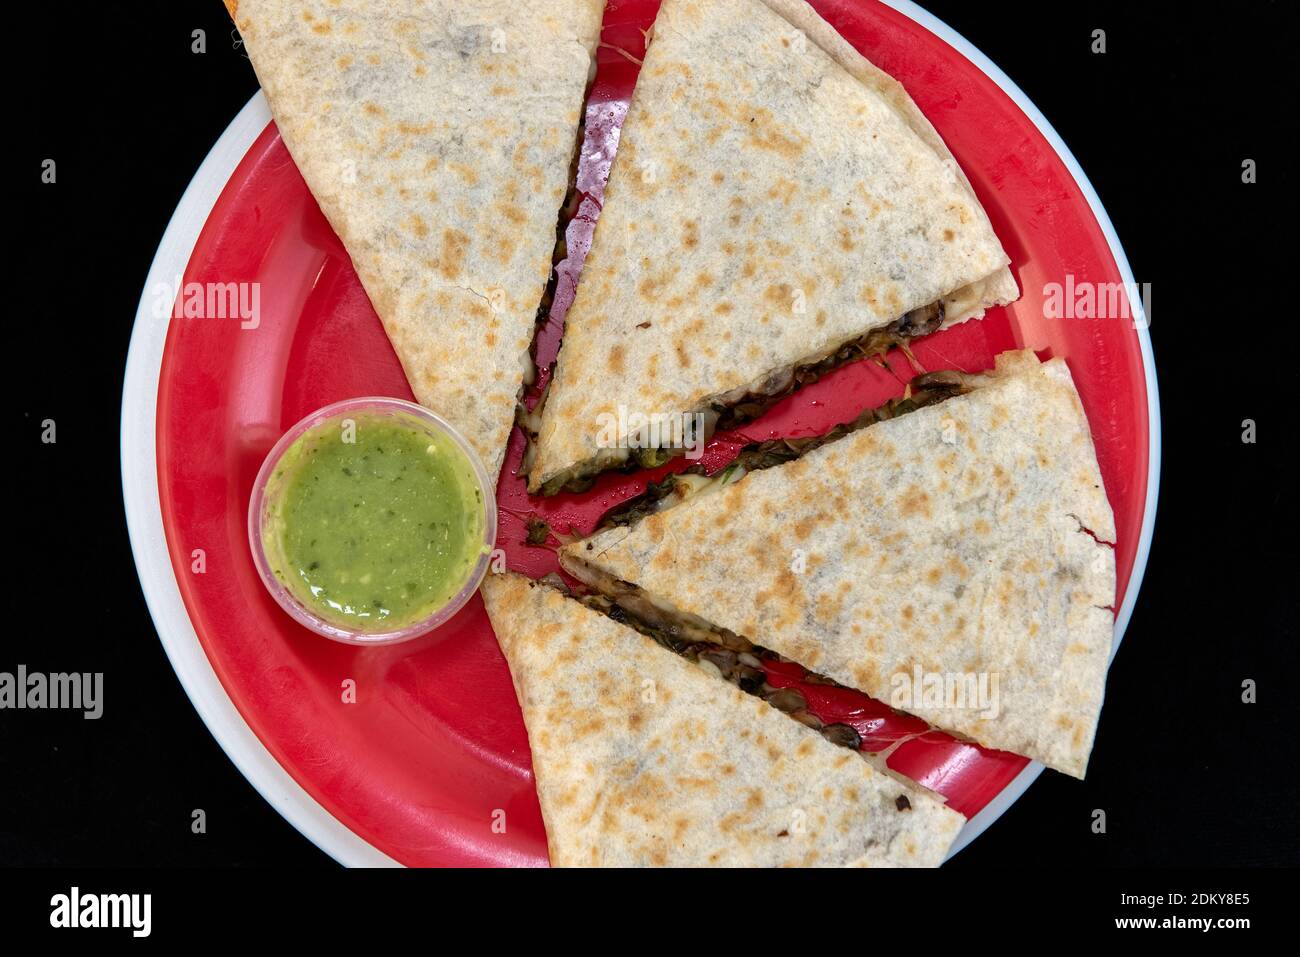 Overhead view of veggie quesadilla loaded with fresh vegetables, melted cheese, and flour tortilla and presented on a red plate. Stock Photo